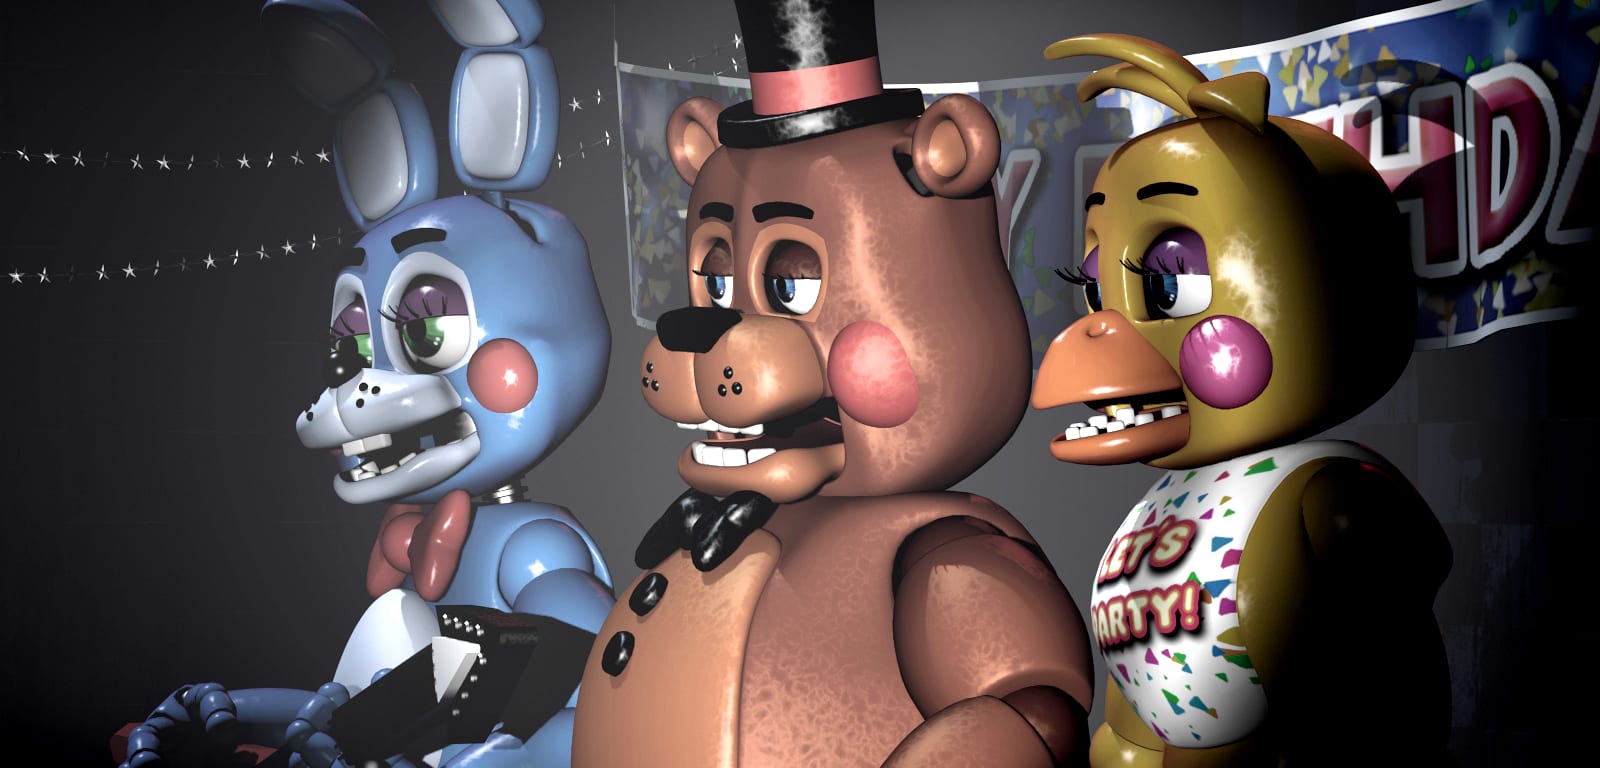 Five nights at freddys 2 personajes